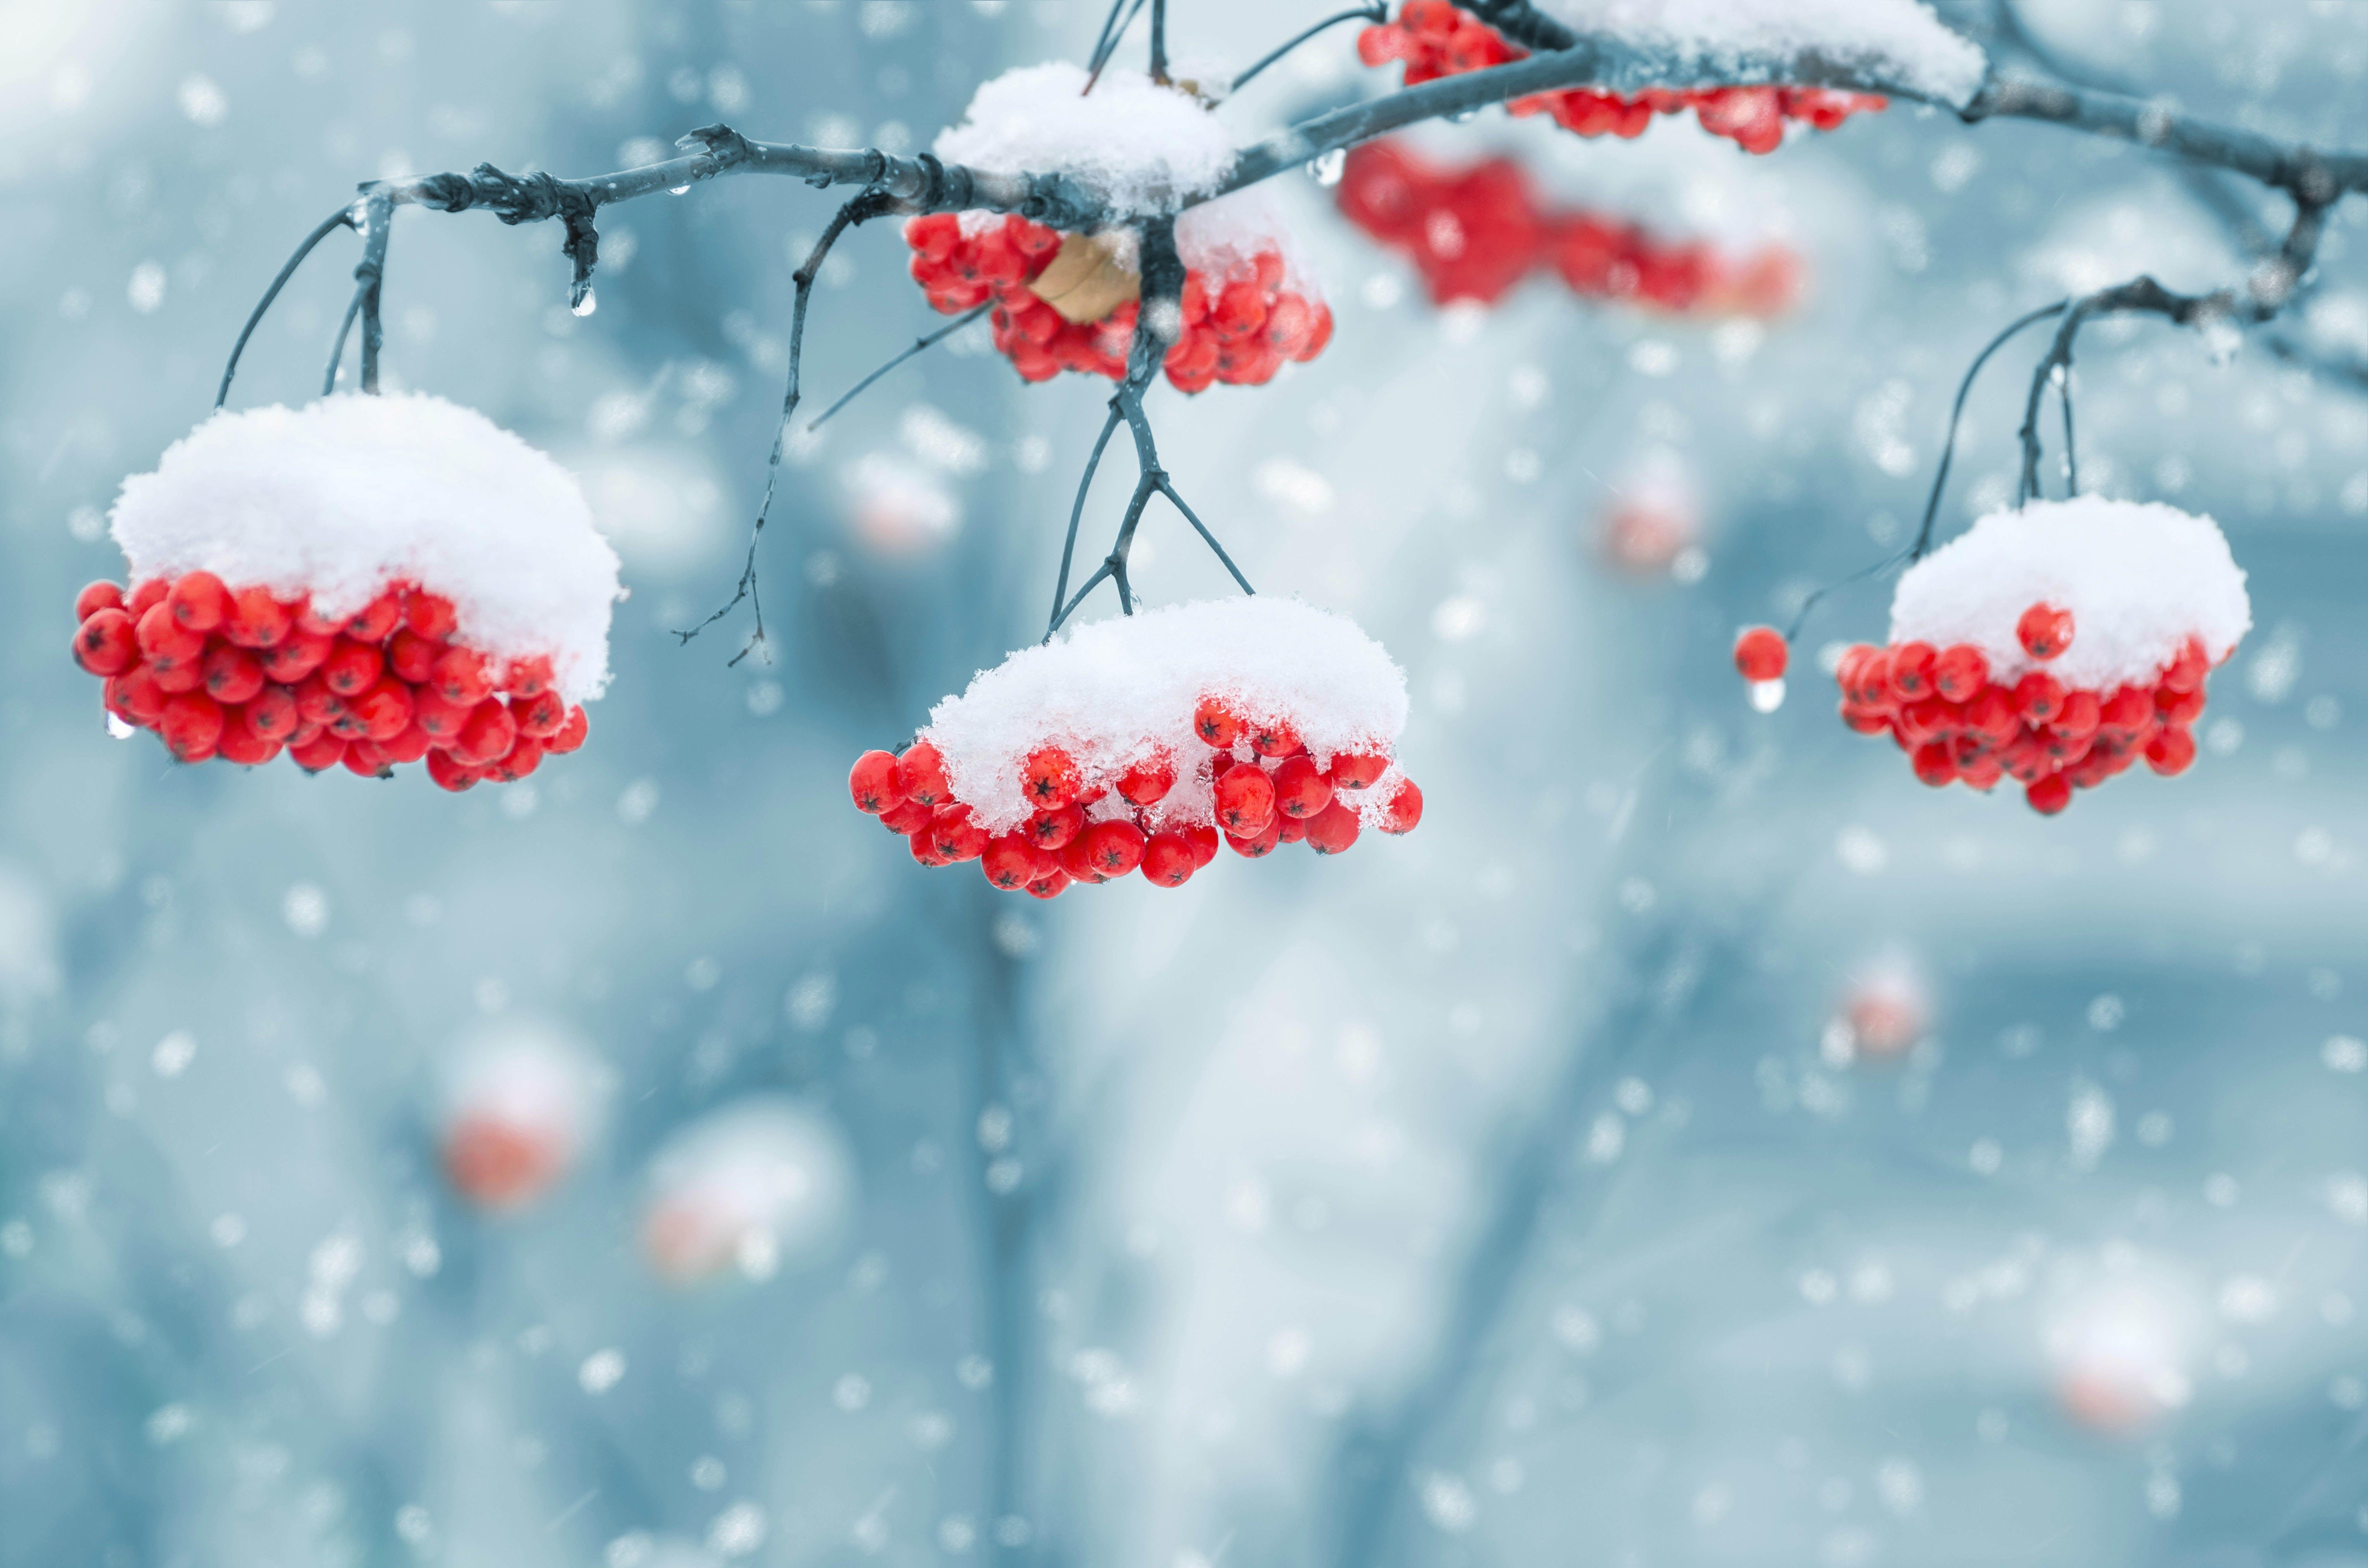 wallpapers nature snow